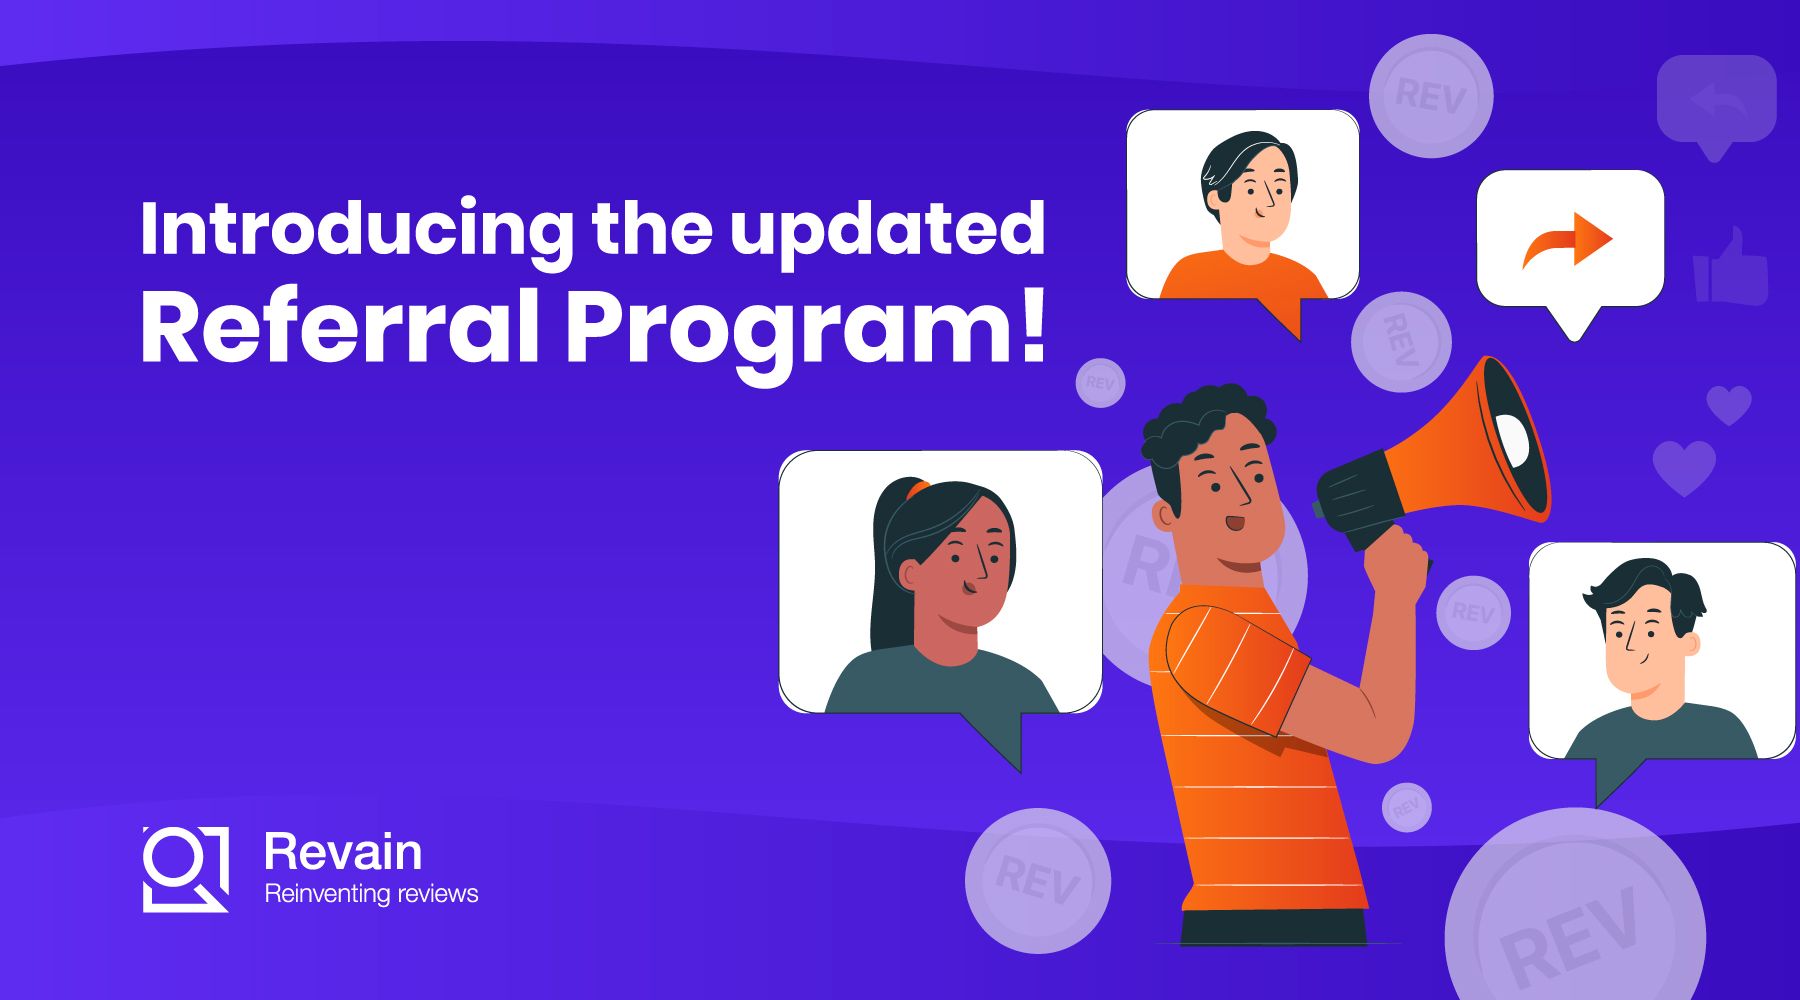 Article Introducing the updated Referral Program!